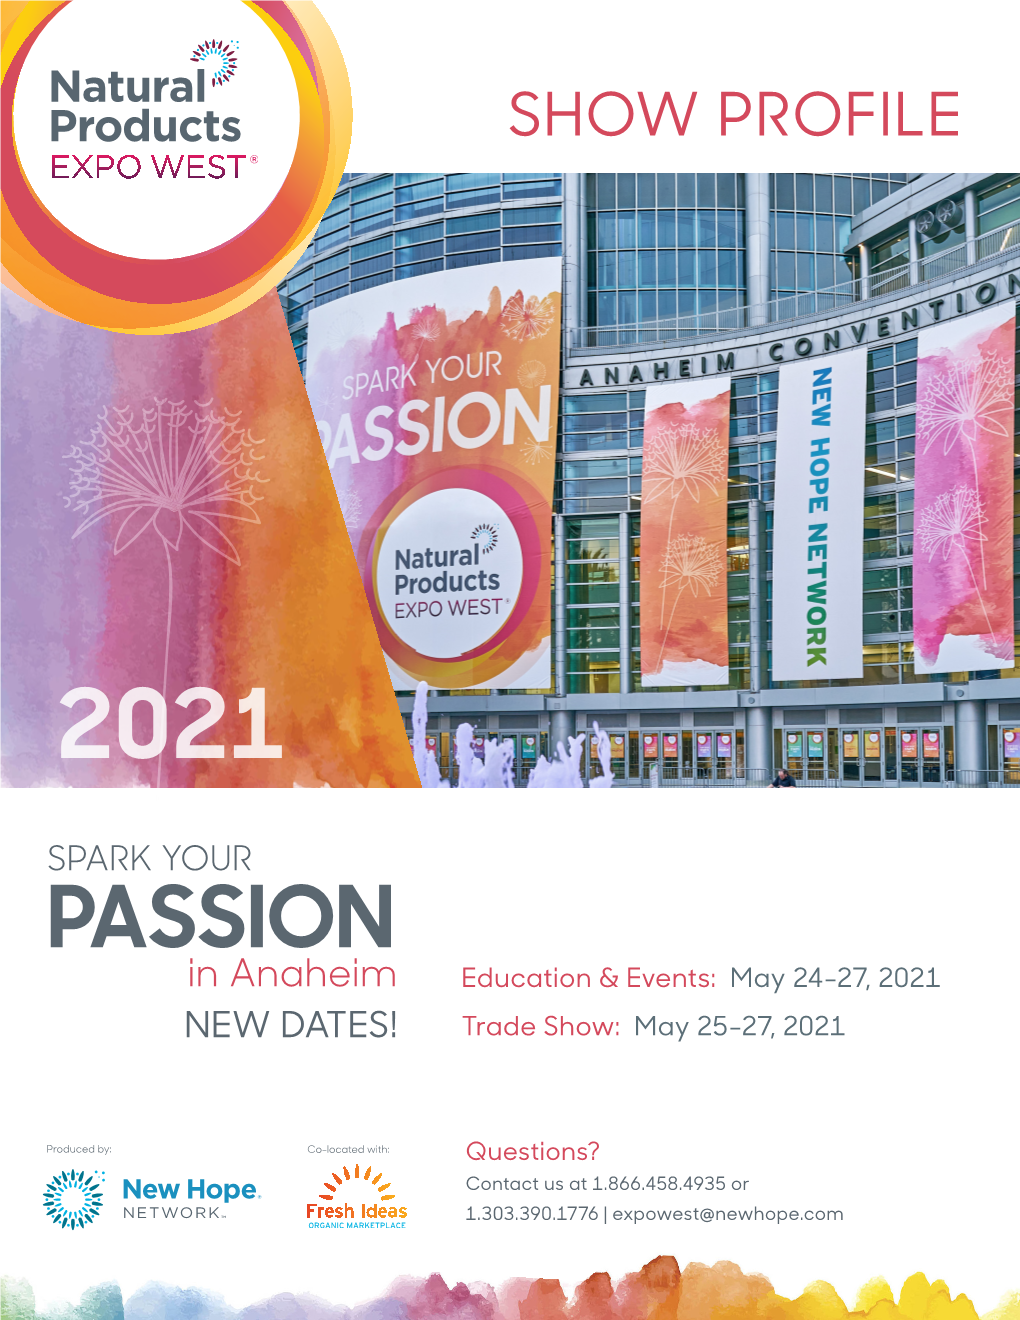 PASSION in Anaheim Education & Events: May 24-27, 2021 NEW DATES! Trade Show: May 25-27, 2021